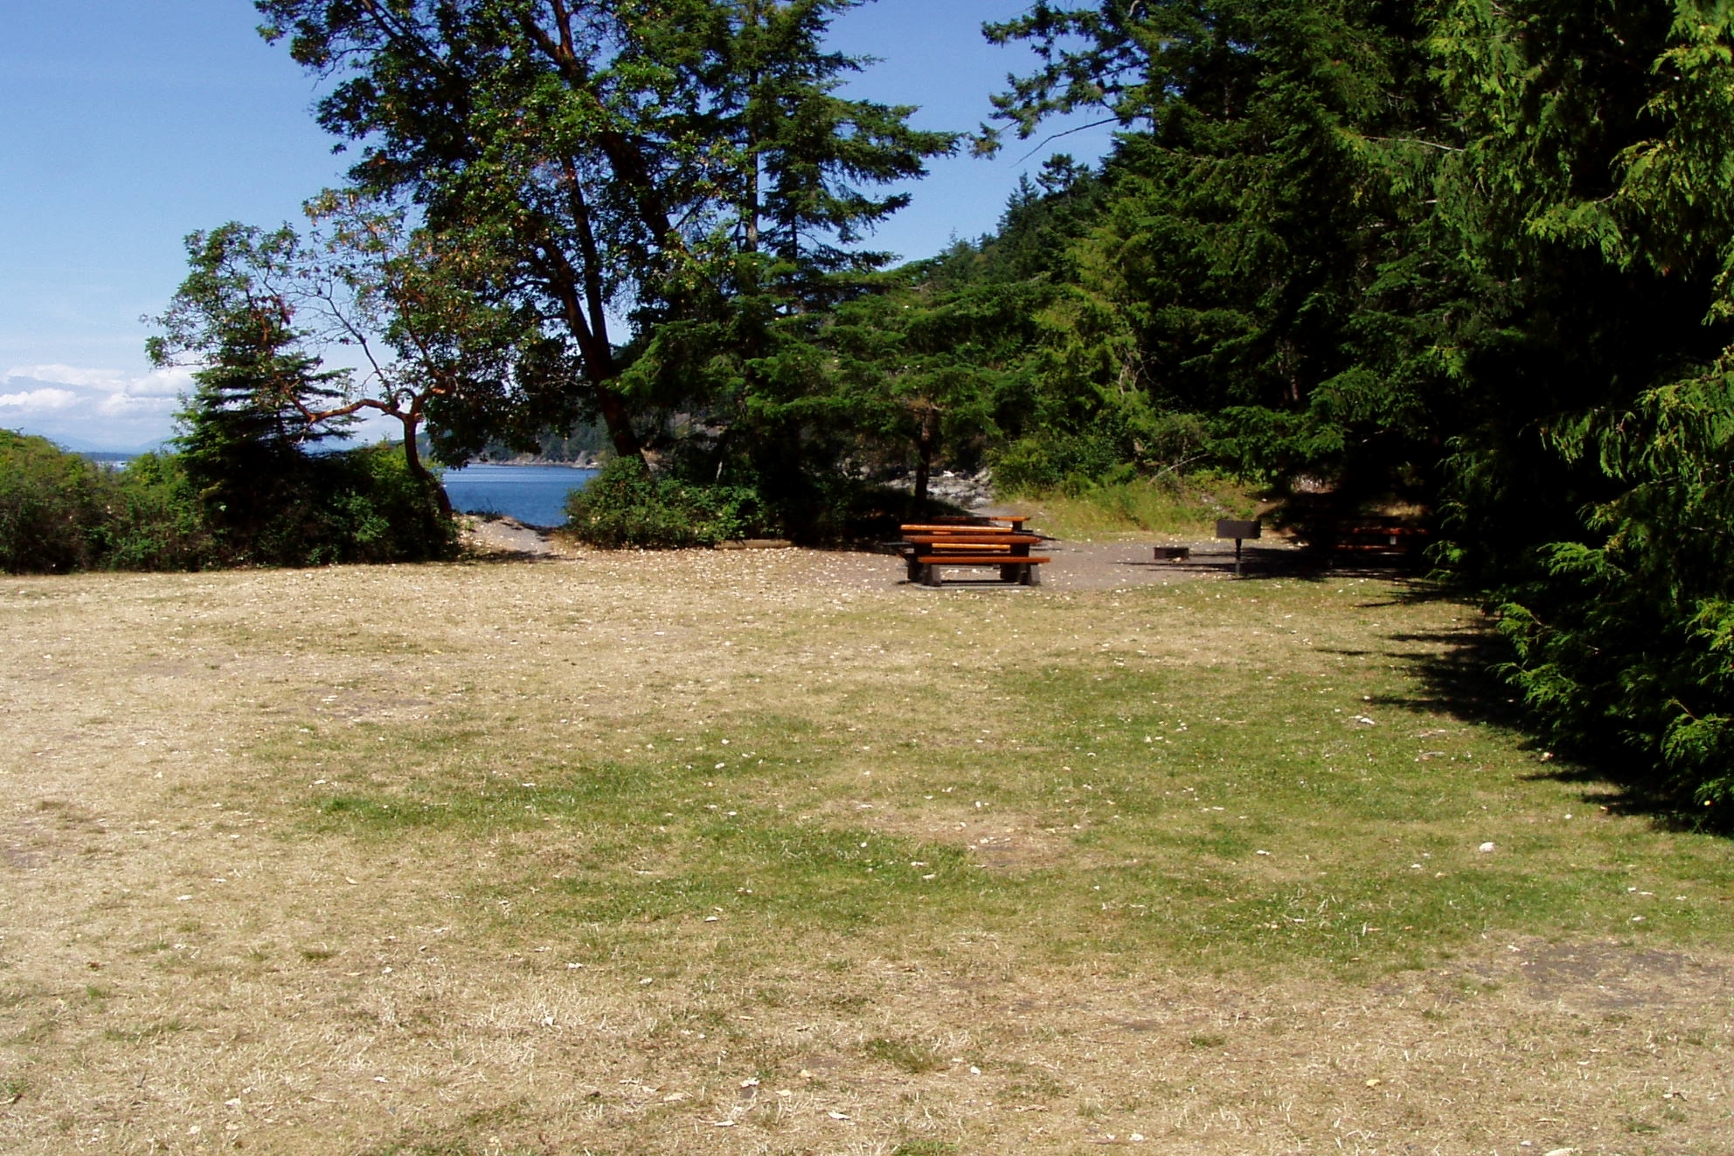 View of picnic table and park bench